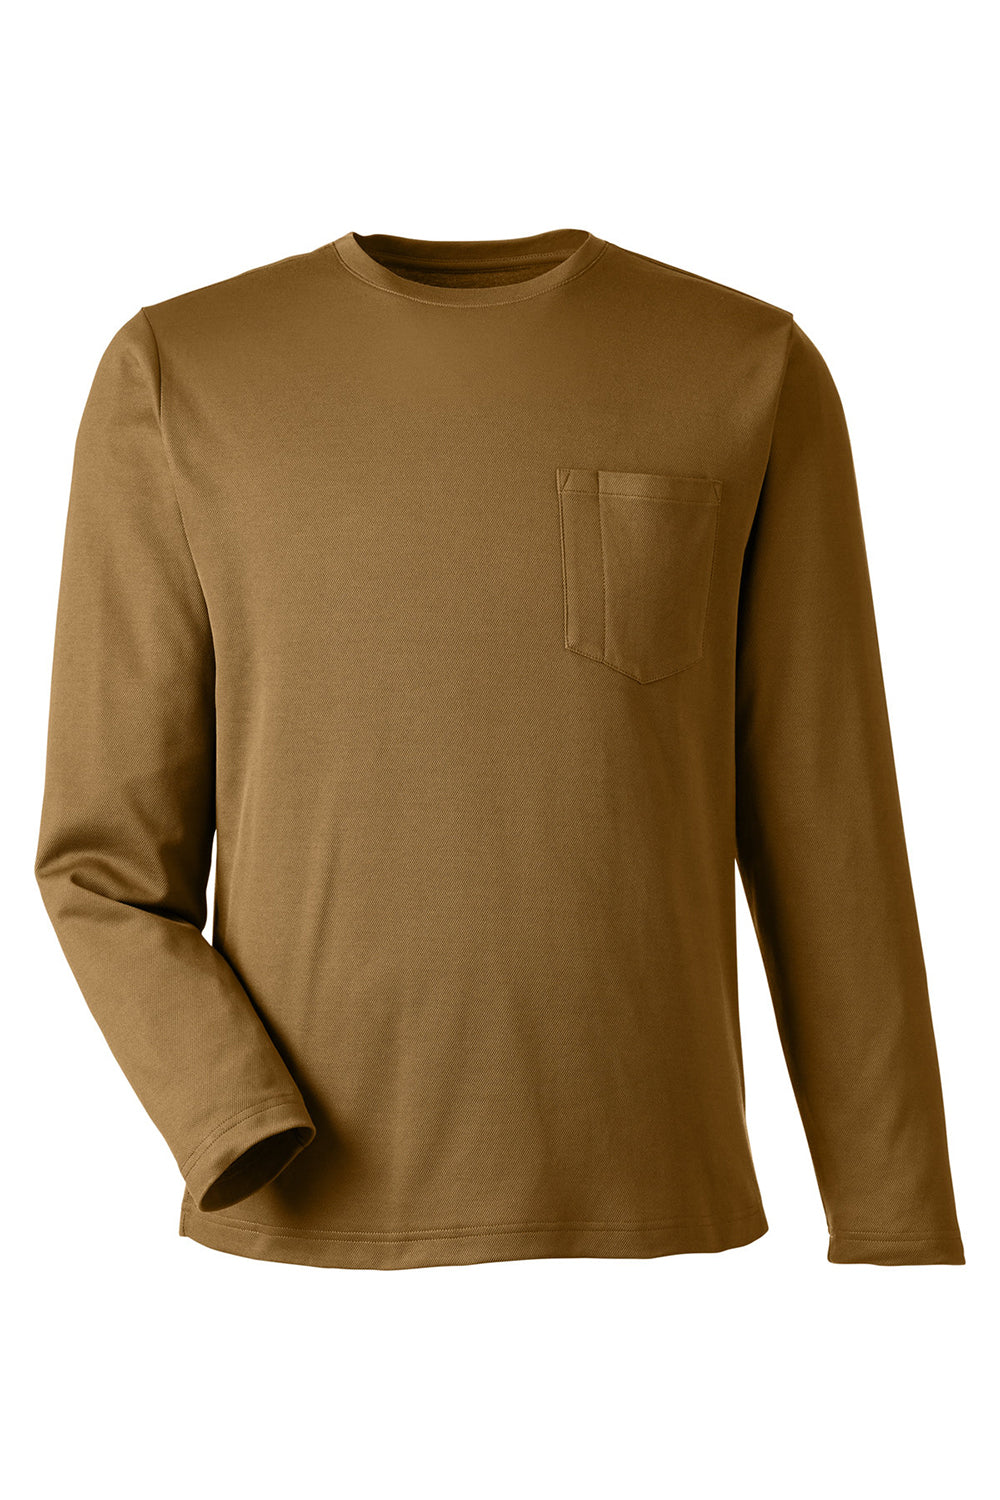 Harriton M118L Mens Charge Moisture Wicking Long Sleeve Crewneck T-Shirt Coyote Brown Flat Front